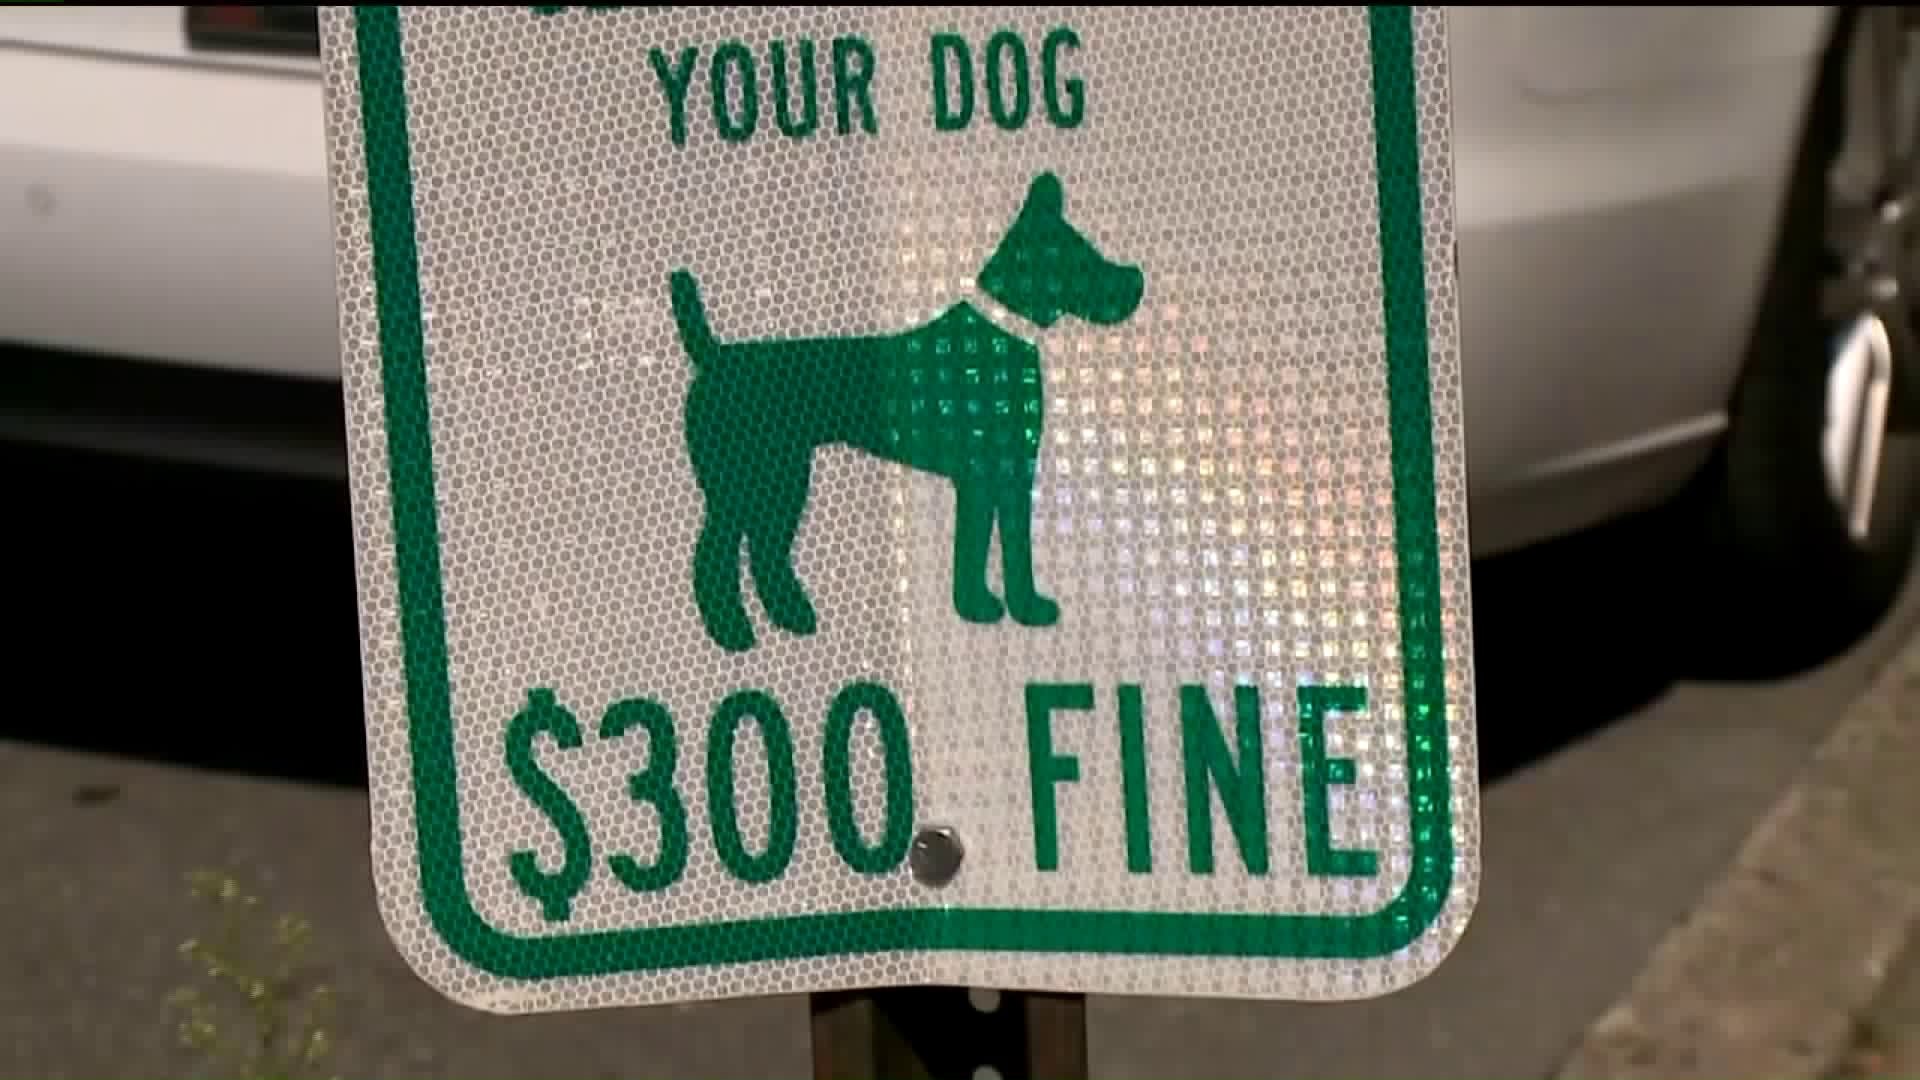 Scoop the Poop or Pay the Fine